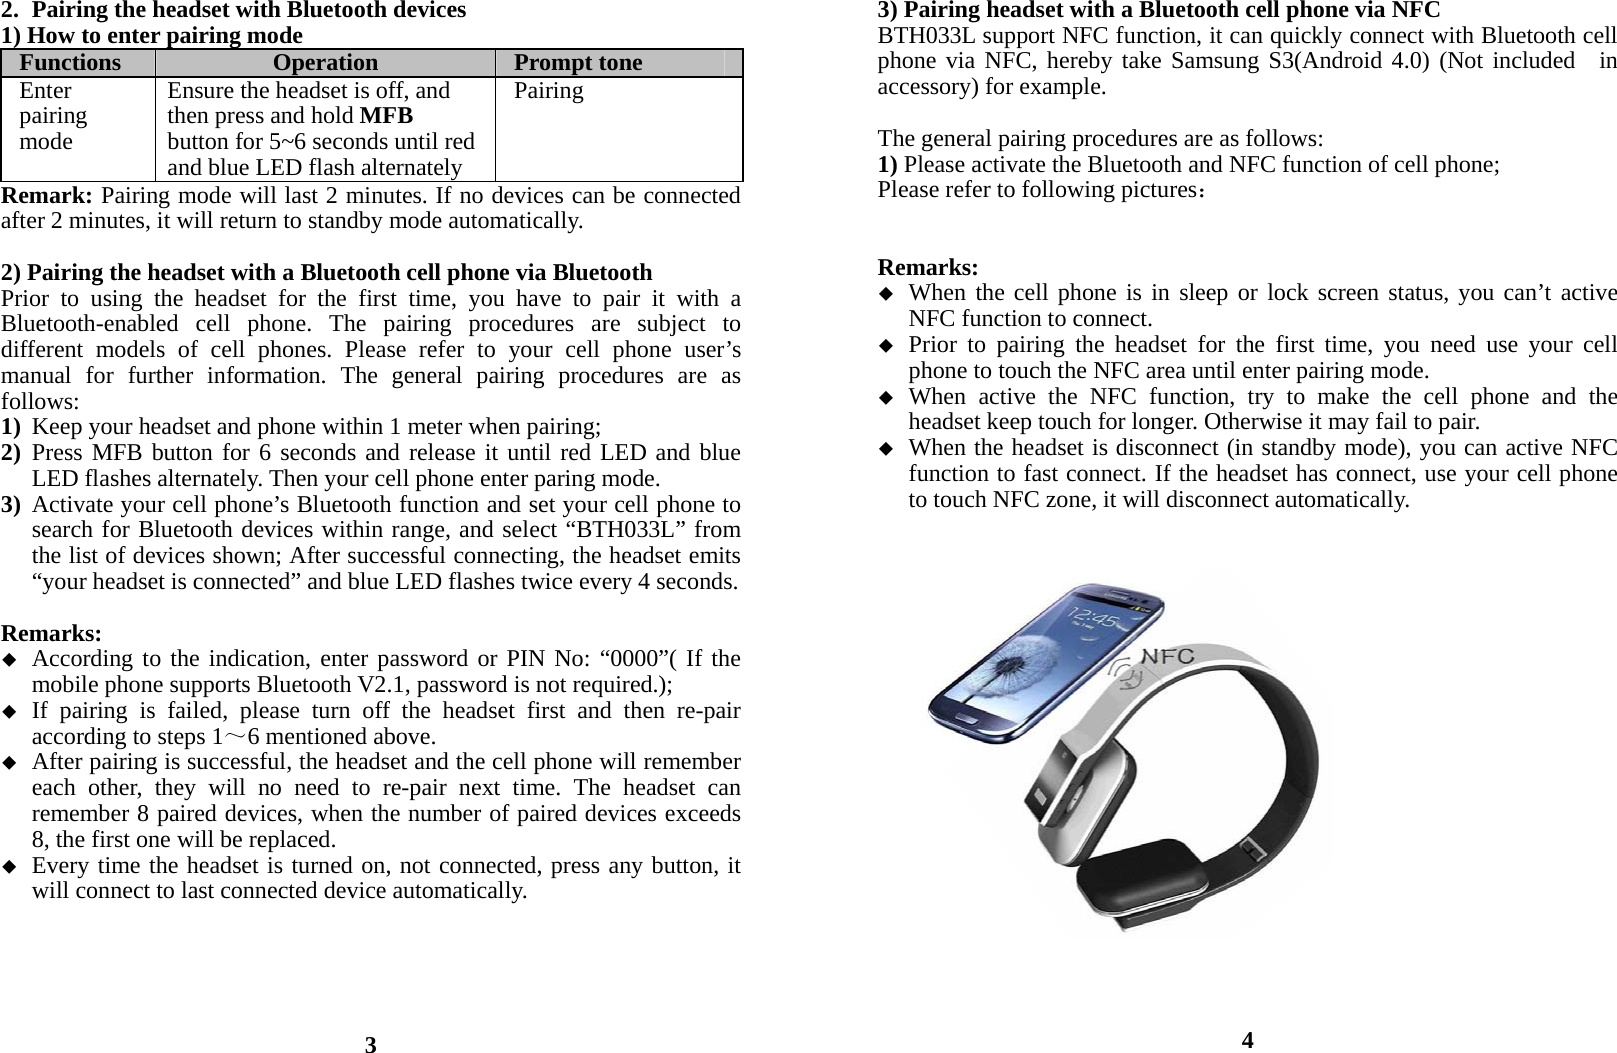 2. Pairing the headset with Bluetooth devices 1) How to enter pairing mode Functions  Operation  Prompt tone Enter pairing mode Ensure the headset is off, and then press and hold MFB button for 5~6 seconds until red and blue LED flash alternatelyPairingRemark: Pairing mode will last 2 minutes. If no devices can be connected after 2 minutes, it will return to standby mode automatically.  2) Pairing the headset with a Bluetooth cell phone via Bluetooth   Prior to using the headset for the first time, you have to pair it with a Bluetooth-enabled cell phone. The pairing procedures are subject to different models of cell phones. Please refer to your cell phone user’s manual for further information. The general pairing procedures are as follows: 1) Keep your headset and phone within 1 meter when pairing; 2) Press MFB button for 6 seconds and release it until red LED and blue LED flashes alternately. Then your cell phone enter paring mode. 3) Activate your cell phone’s Bluetooth function and set your cell phone to search for Bluetooth devices within range, and select “BTH033L” from the list of devices shown; After successful connecting, the headset emits “your headset is connected” and blue LED flashes twice every 4 seconds.  Remarks:   According to the indication, enter password or PIN No: “0000”( If the mobile phone supports Bluetooth V2.1, password is not required.);  If pairing is failed, please turn off the headset first and then re-pair according to steps 1～6 mentioned above.  After pairing is successful, the headset and the cell phone will remember each other, they will no need to re-pair next time. The headset can remember 8 paired devices, when the number of paired devices exceeds 8, the first one will be replaced.  Every time the headset is turned on, not connected, press any button, it will connect to last connected device automatically.        3 3) Pairing headset with a Bluetooth cell phone via NFC BTH033L support NFC function, it can quickly connect with Bluetooth cell phone via NFC, hereby take Samsung S3(Android 4.0) (Not included  in  accessory) for example.  The general pairing procedures are as follows: 1) Please activate the Bluetooth and NFC function of cell phone; Please refer to following pictures：   Remarks:  When the cell phone is in sleep or lock screen status, you can’t active NFC function to connect.  Prior to pairing the headset for the first time, you need use your cell phone to touch the NFC area until enter pairing mode.  When active the NFC function, try to make the cell phone and the headset keep touch for longer. Otherwise it may fail to pair.  When the headset is disconnect (in standby mode), you can active NFC function to fast connect. If the headset has connect, use your cell phone to touch NFC zone, it will disconnect automatically.                     4 